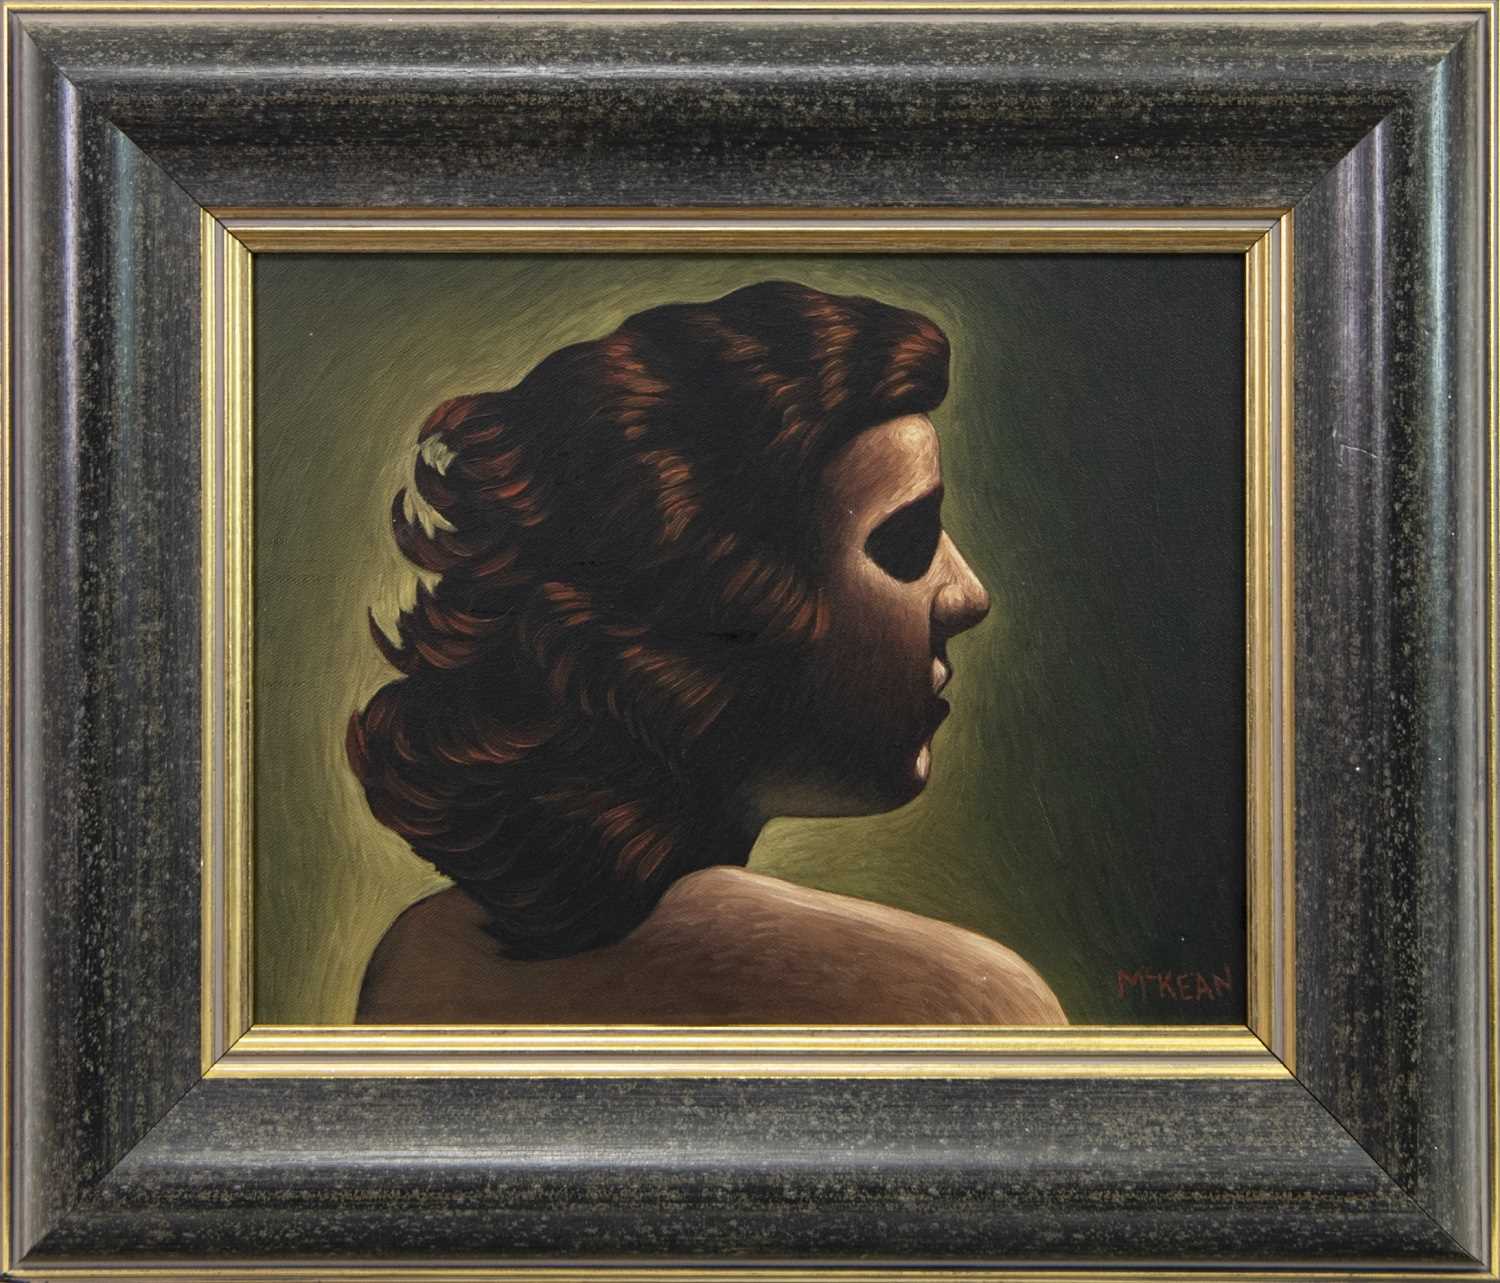 Lot 516 - YOUNG GIRL II, AN OIL BY GRAHAM MCKEAN